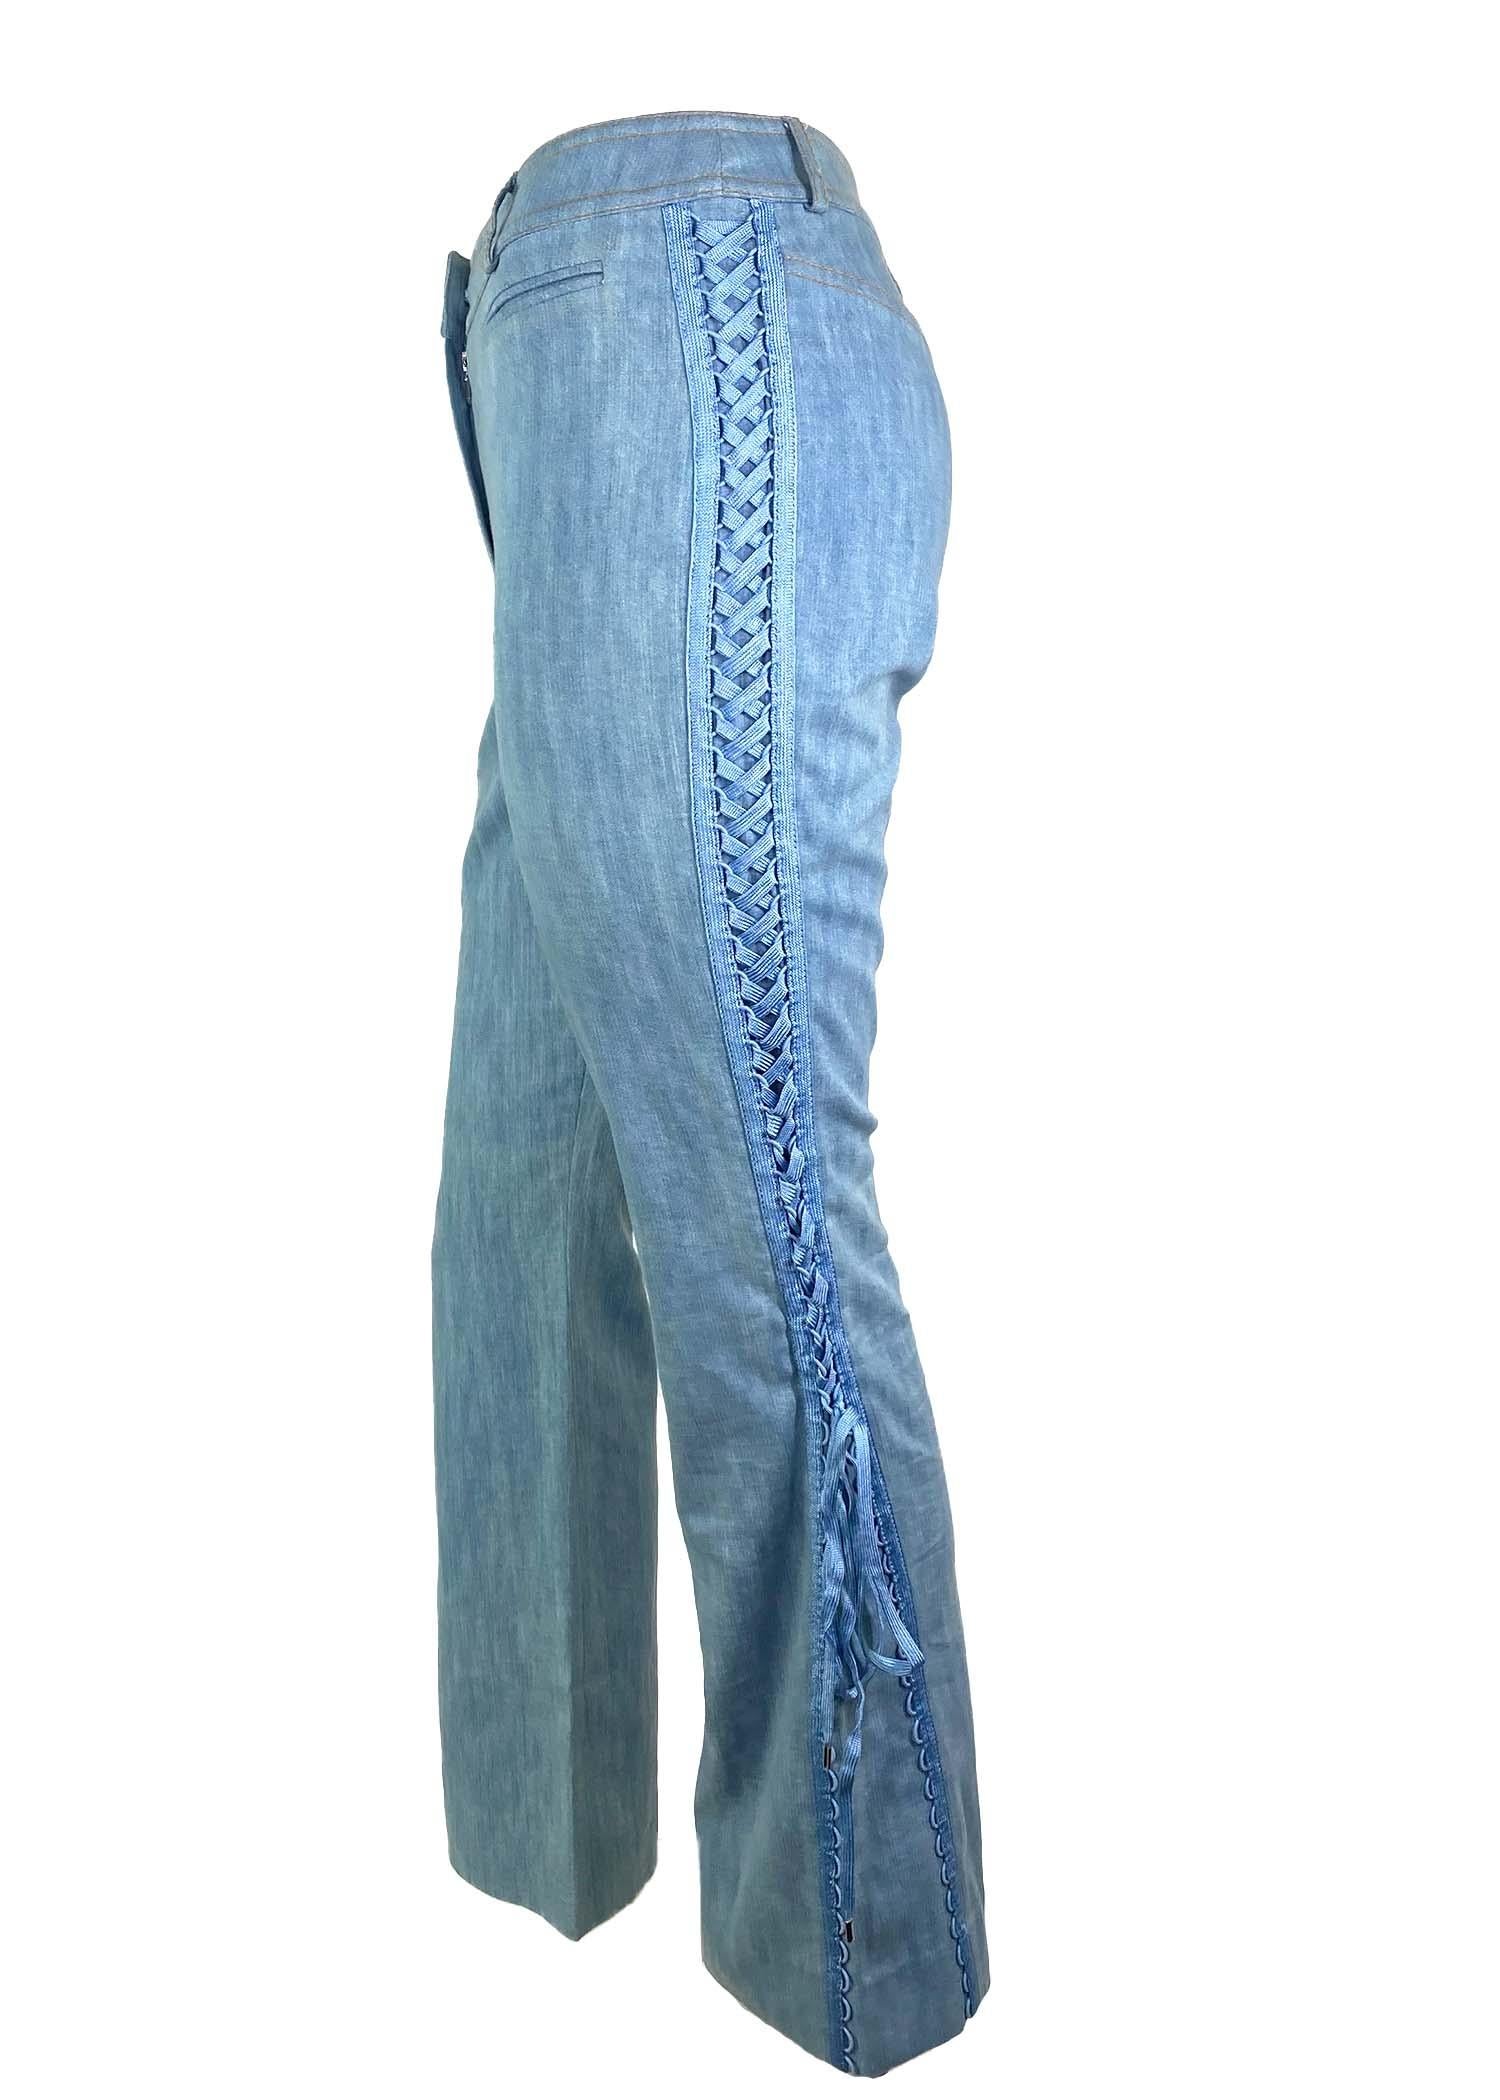 Presenting a boot cut lace-up pair of Christian Dior chambray pants, designed by John Galliano. From the Fall/Winter 2002 collection, these incredible pants feature lace up sides creating a corset like design. The laces can be tied as loose or as